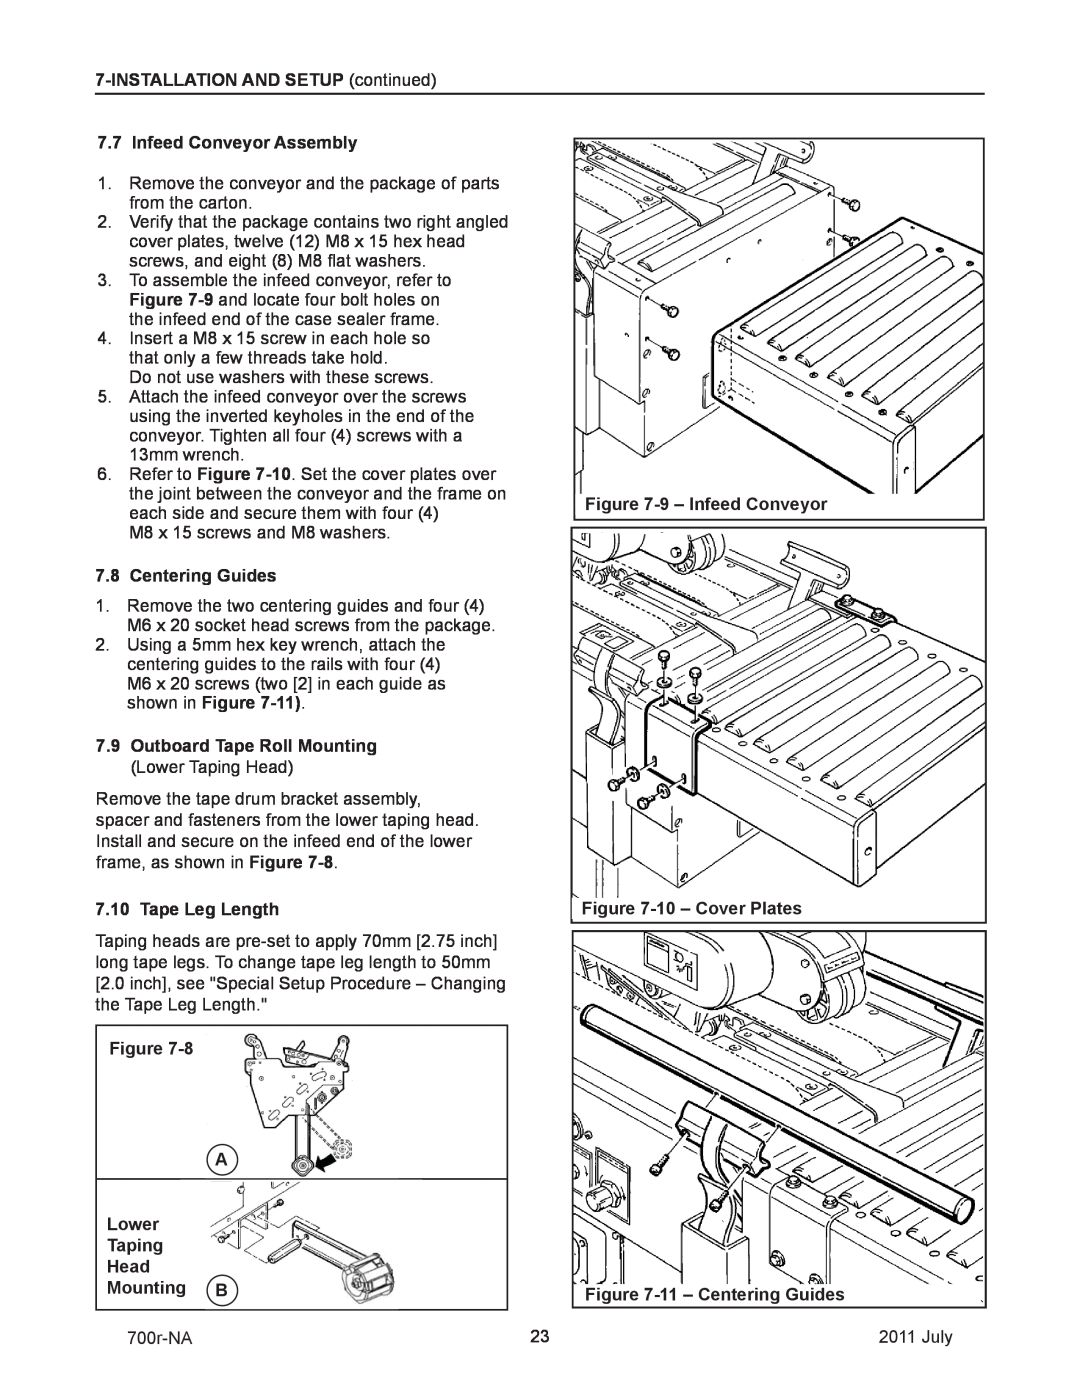 3M 40800 operating instructions INSTALLATIONAND SETUP continued 